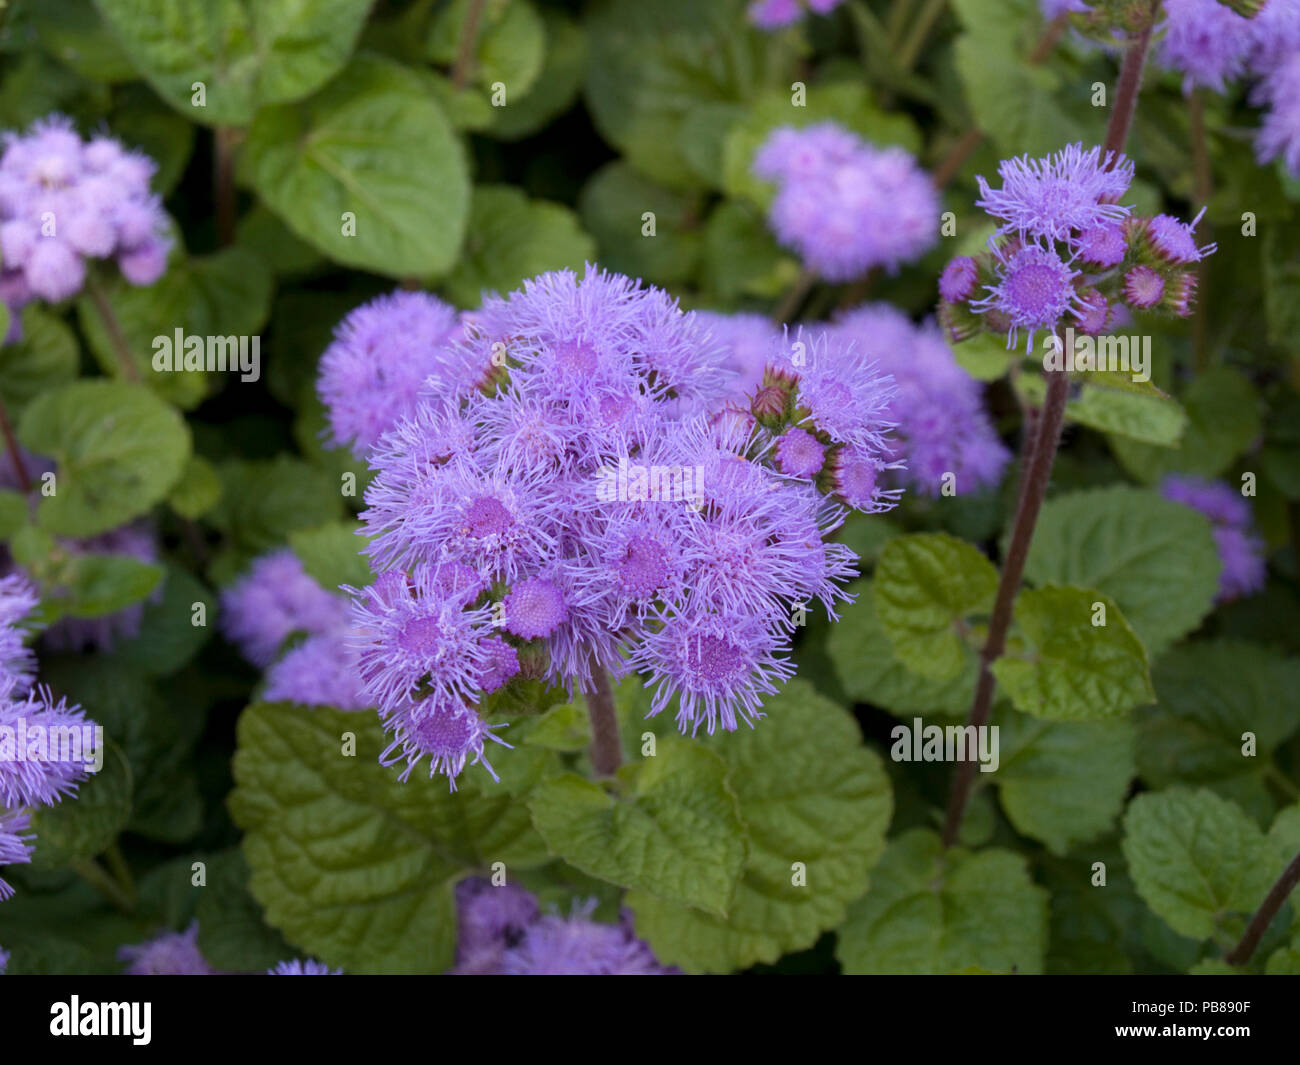 Ageratum flowers on the bed Stock Photo